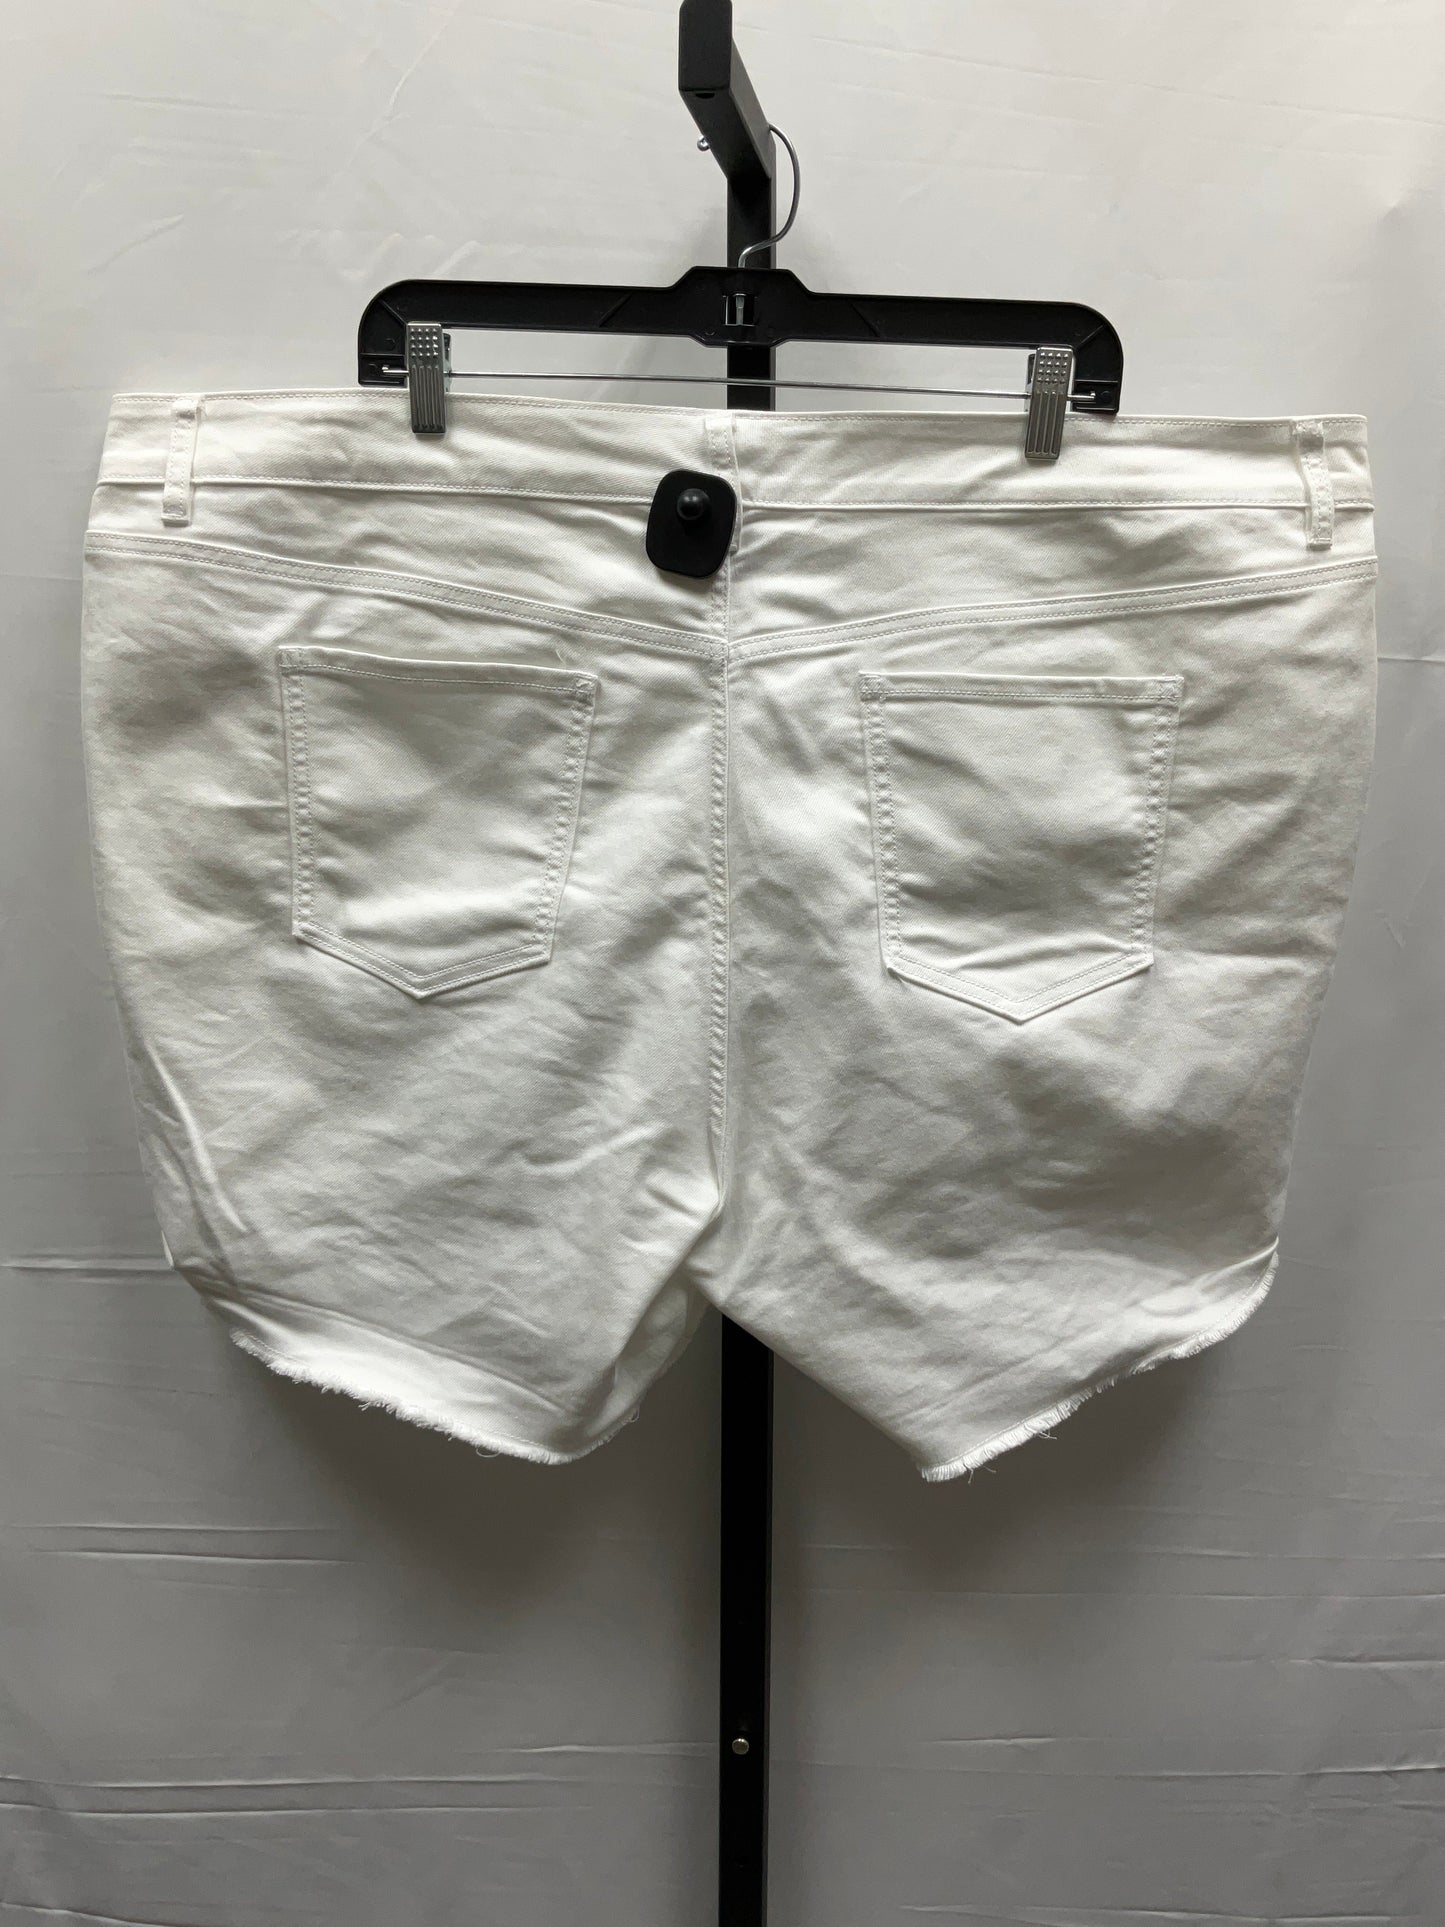 Shorts By Old Navy  Size: 24